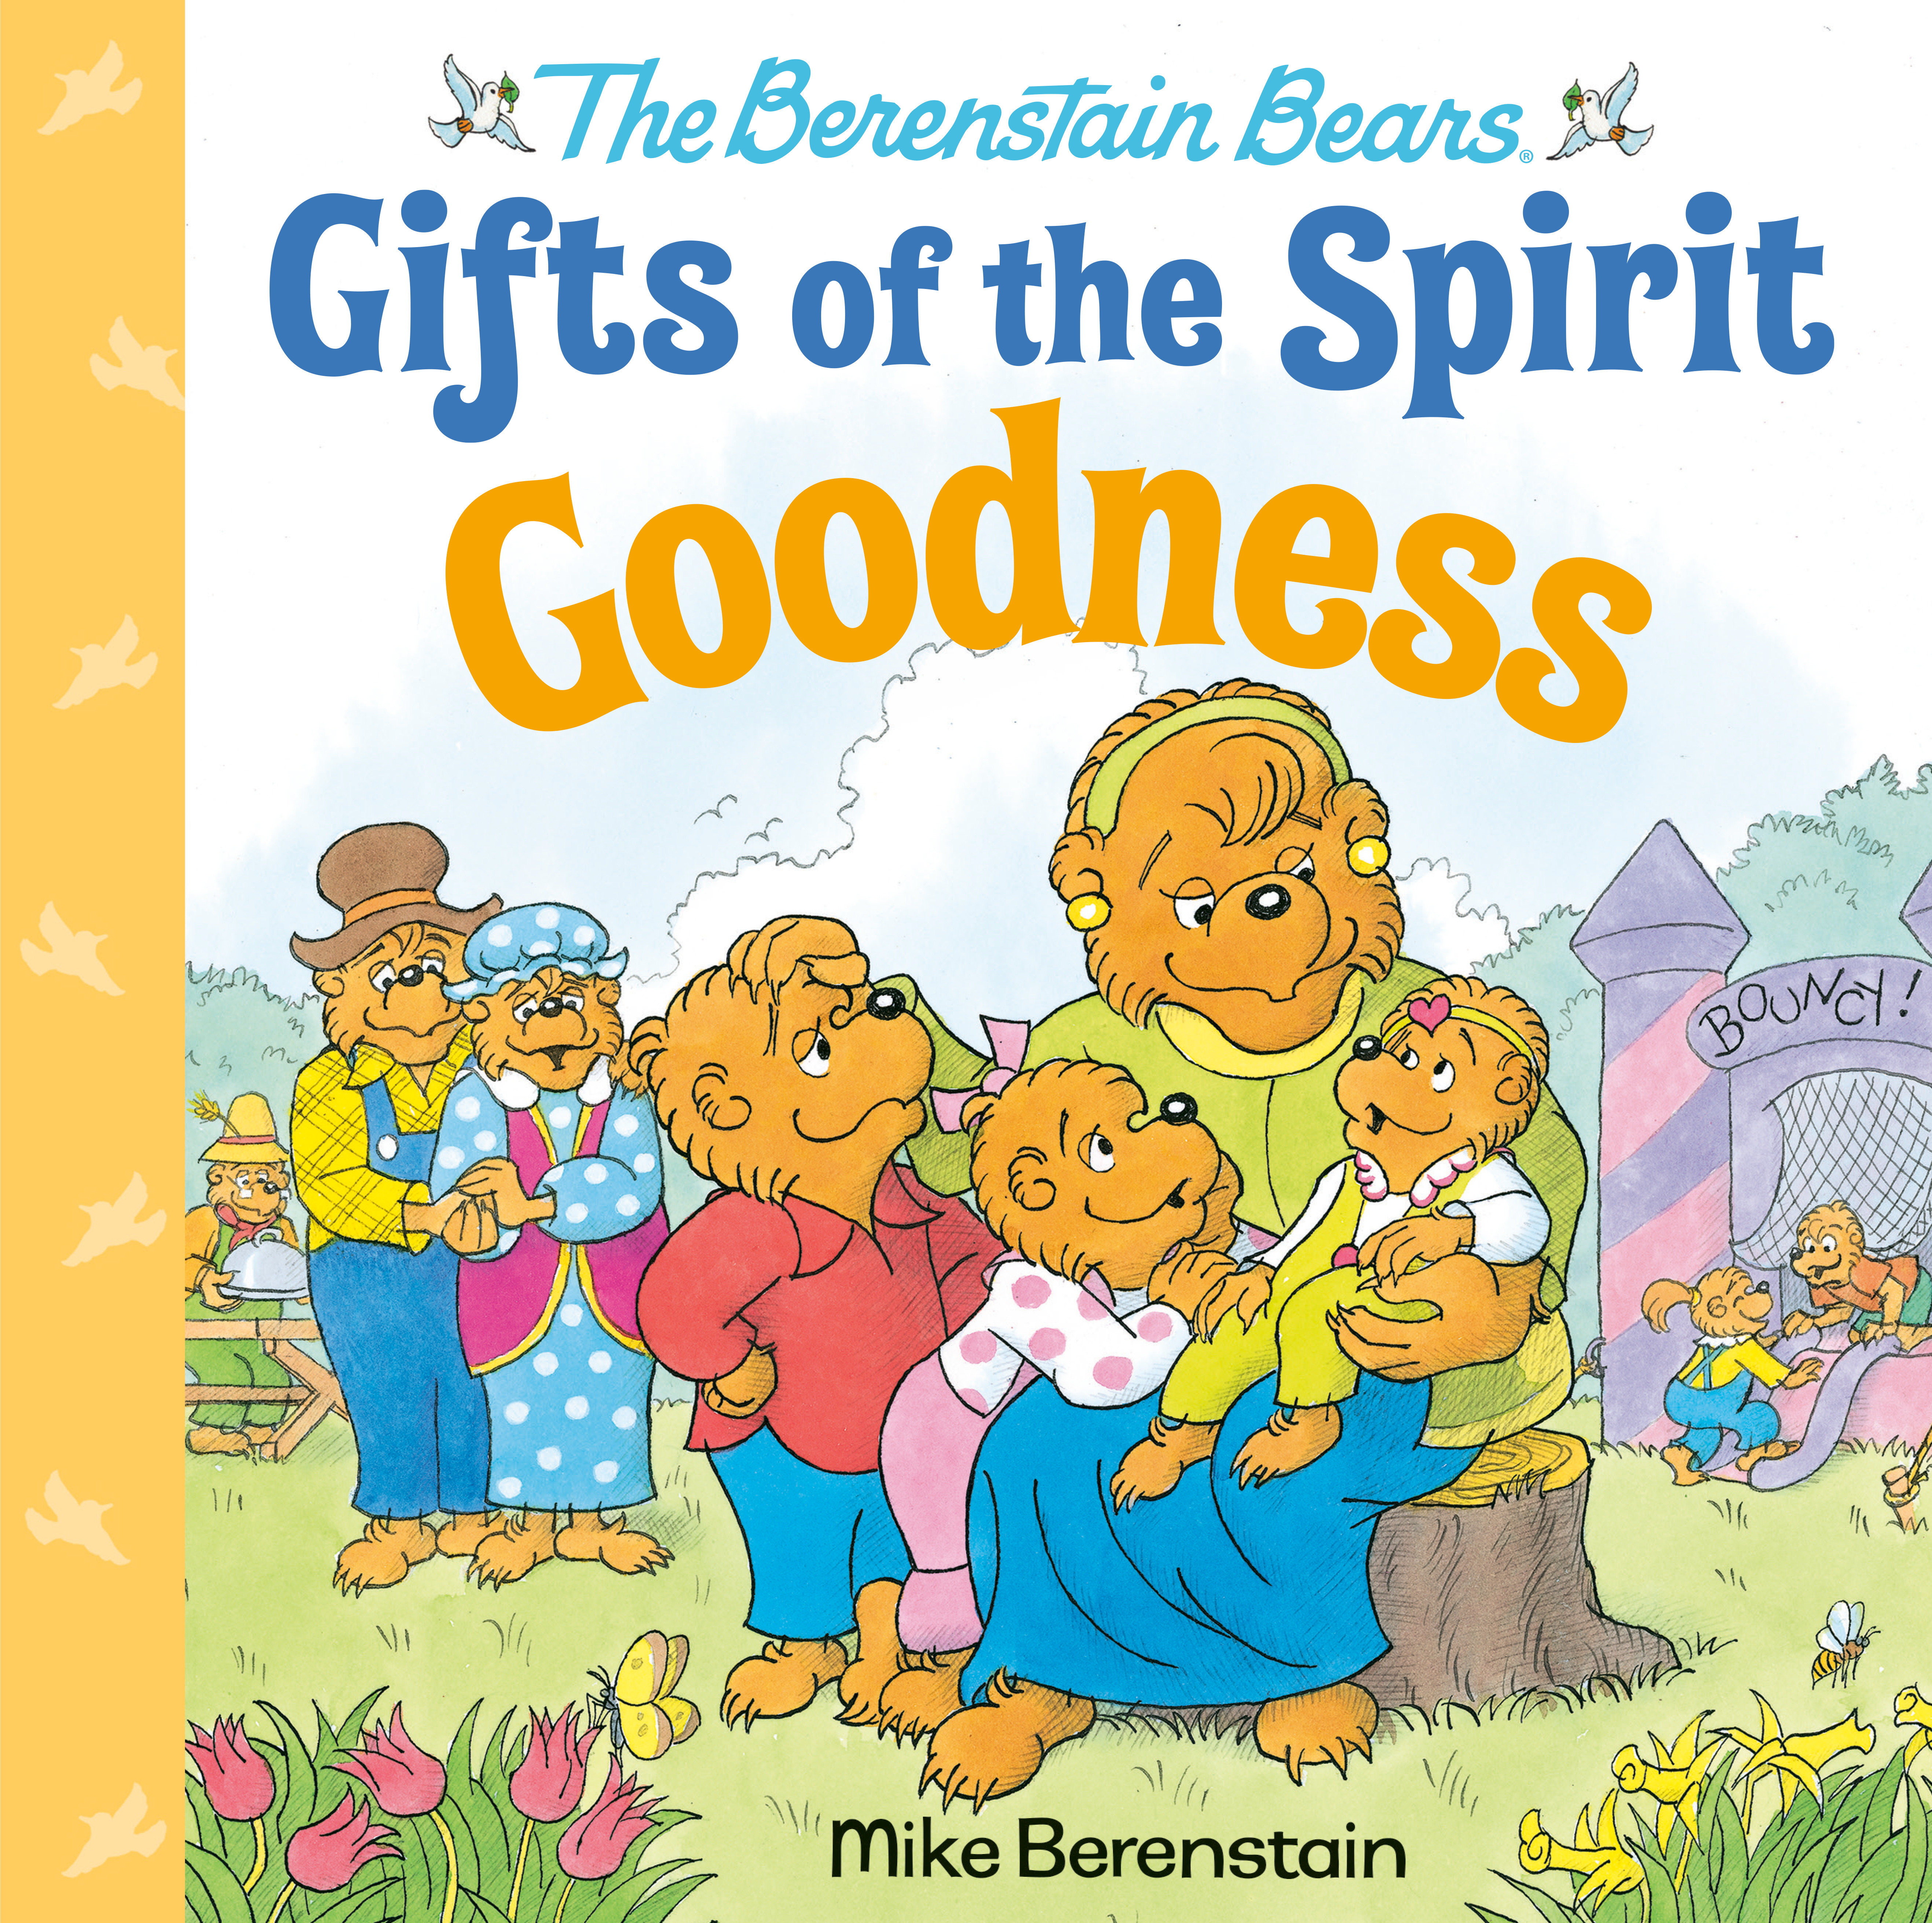 Goodness (Berenstain Bears Gifts Of The Spirit) (Hardcover Book)